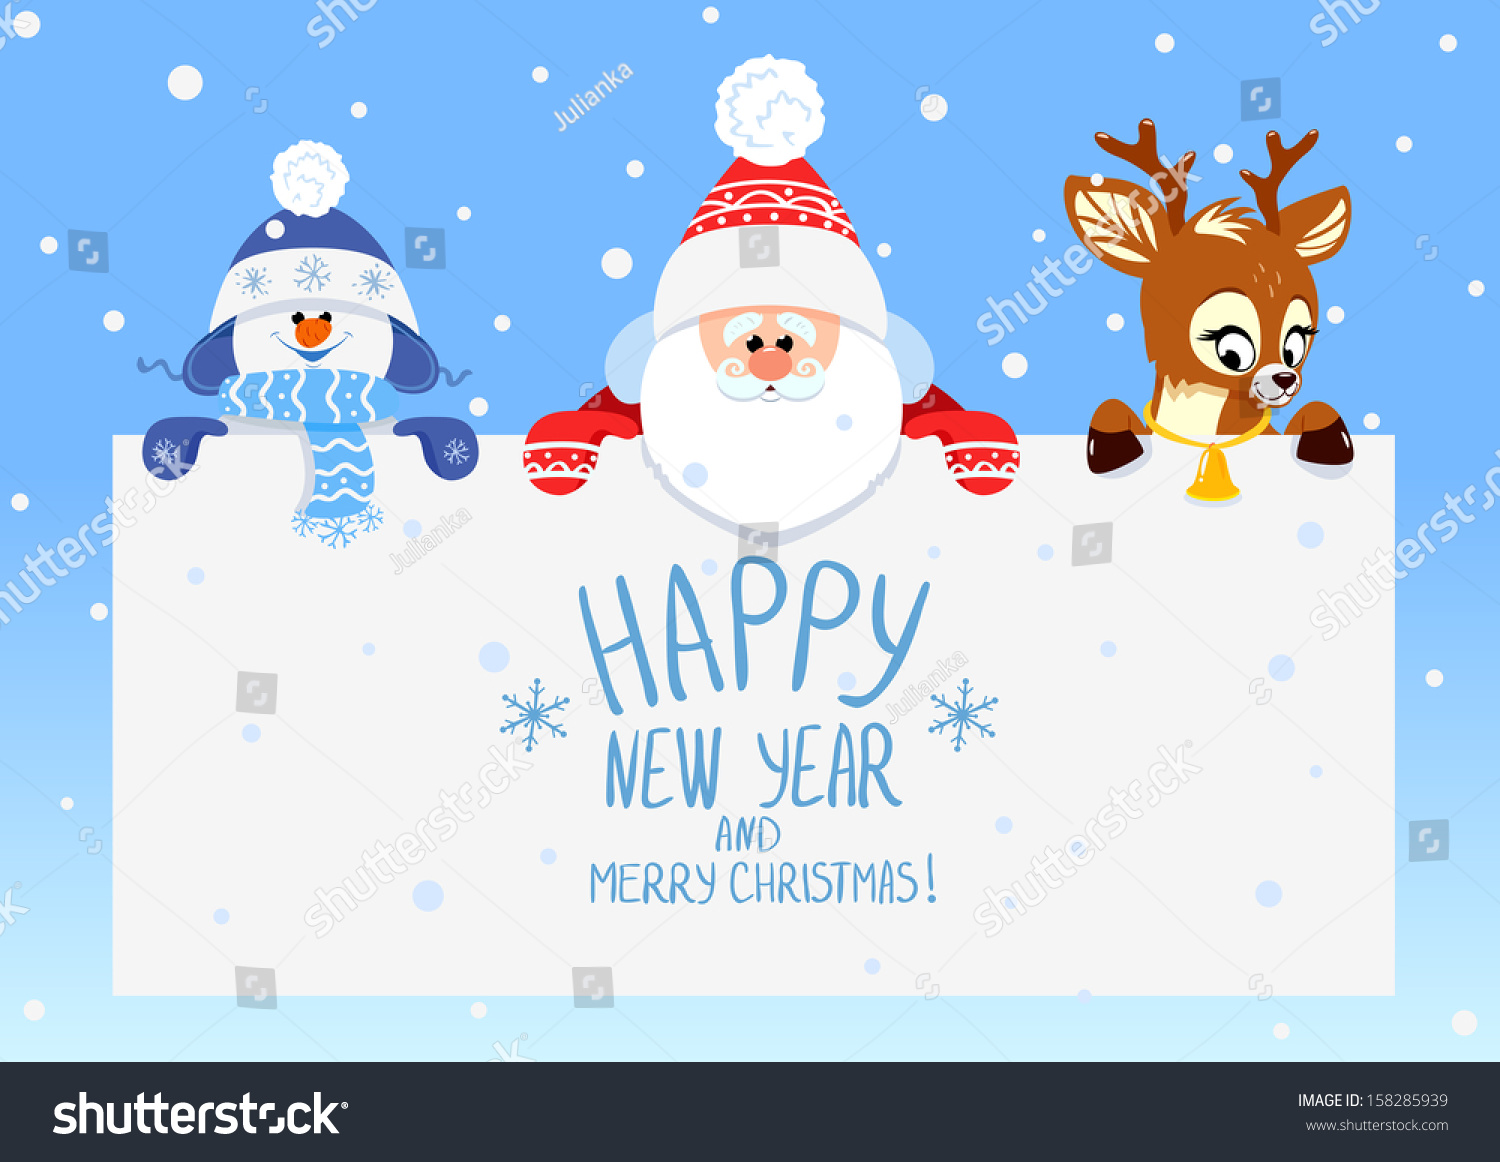 stock vector congratulation with christmas and new year santa claus with deer and snowman